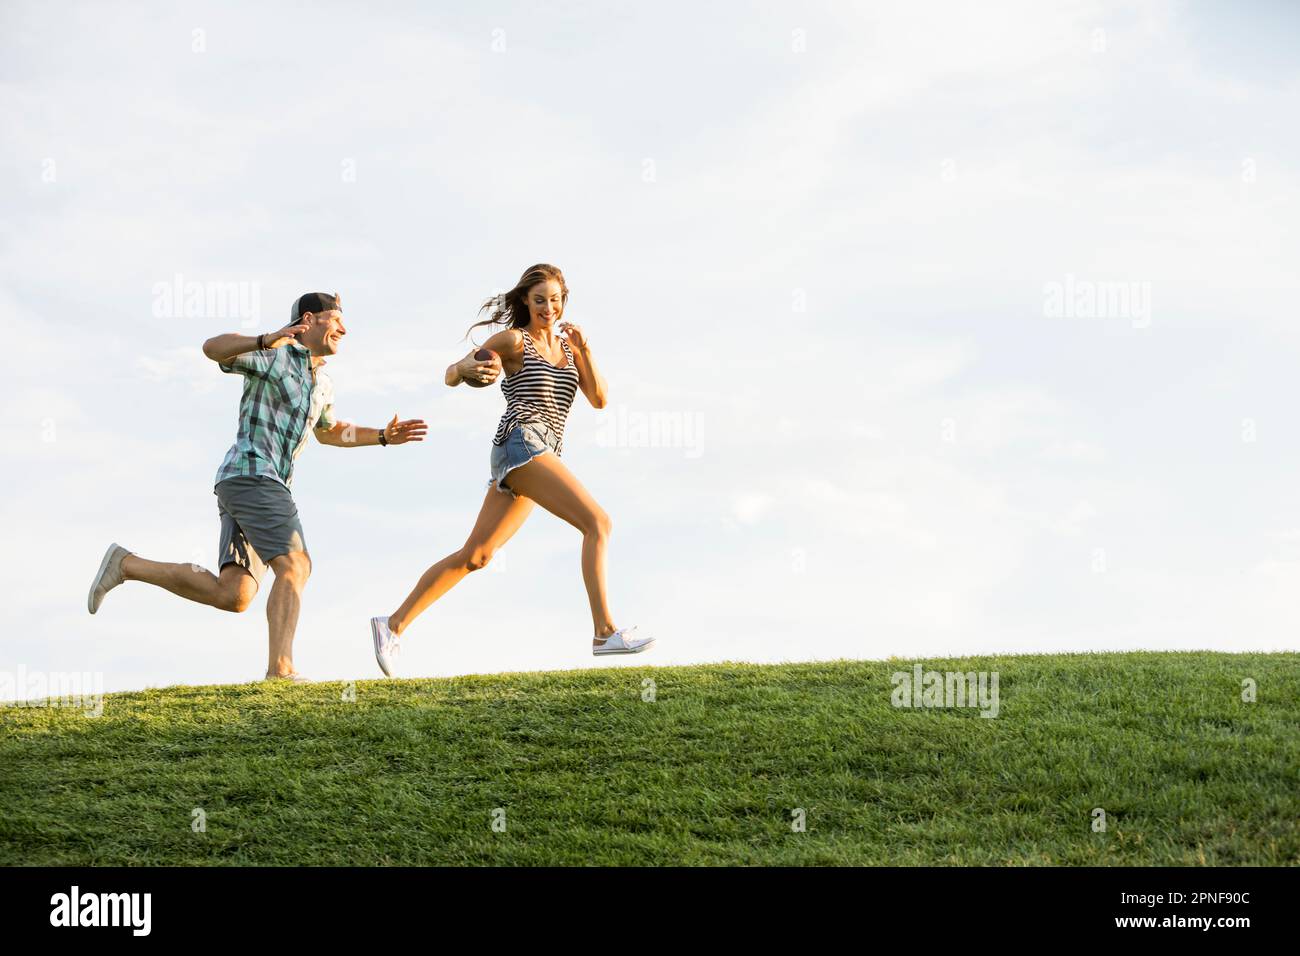 Woman and man running on grassy hill in park Stock Photo